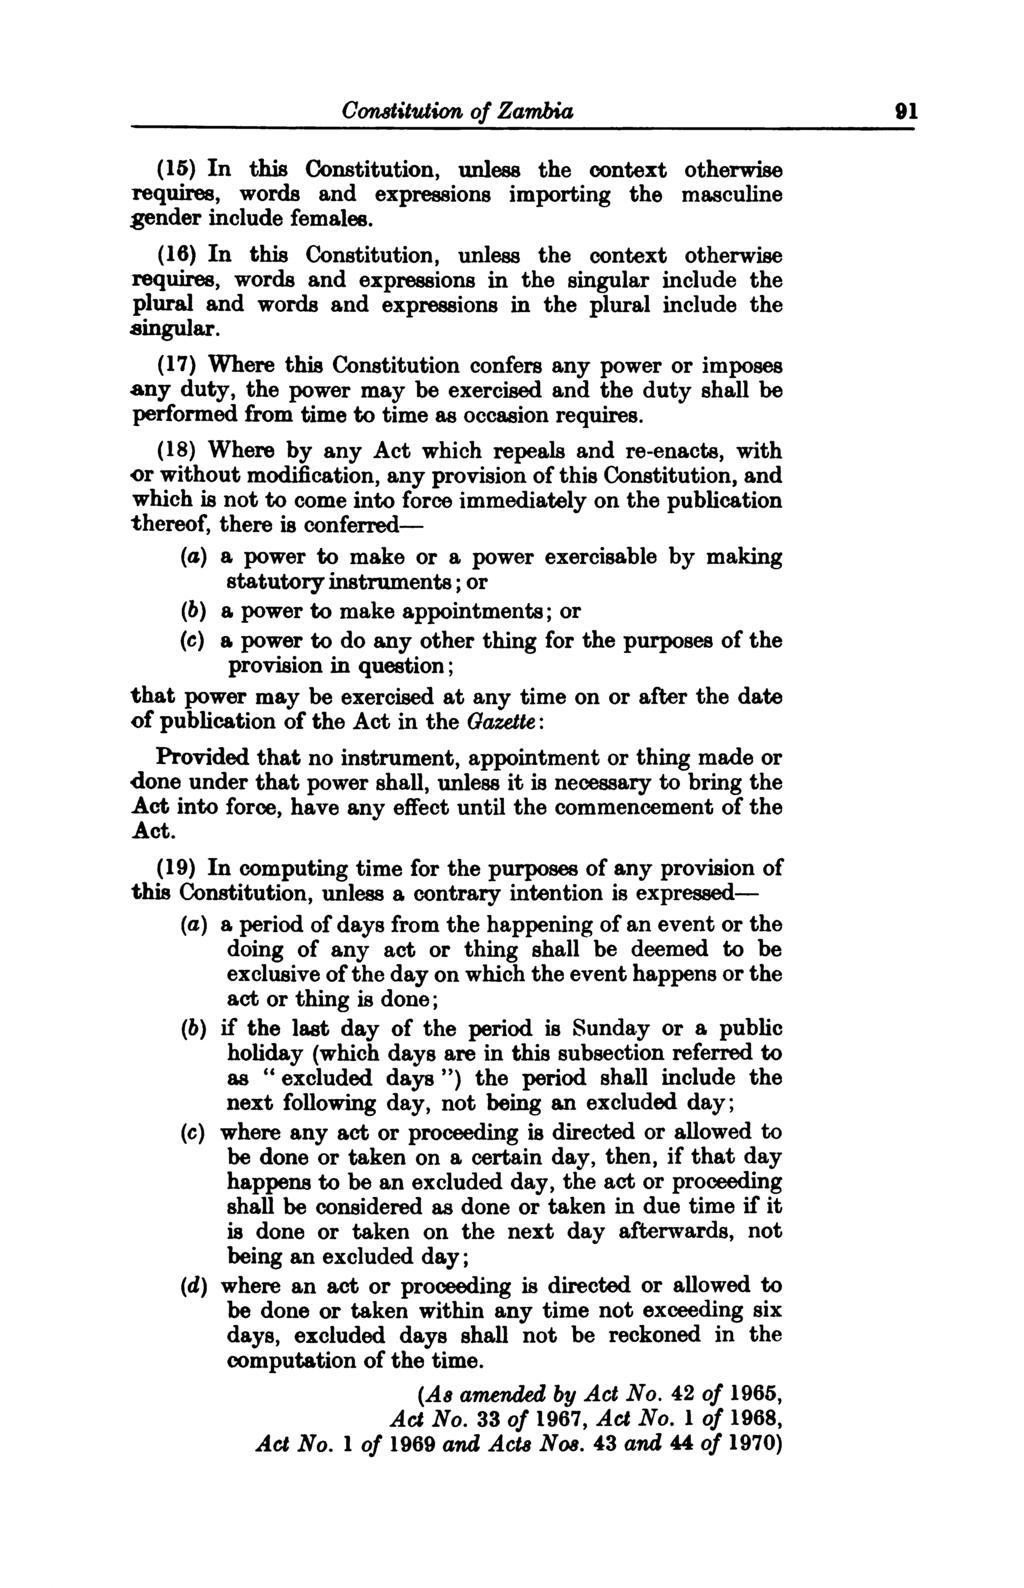 Constitution of Zambia 91 (15) In this Constitution, unless the context otherwise requires, words and expressions importing the masculine gender include females.